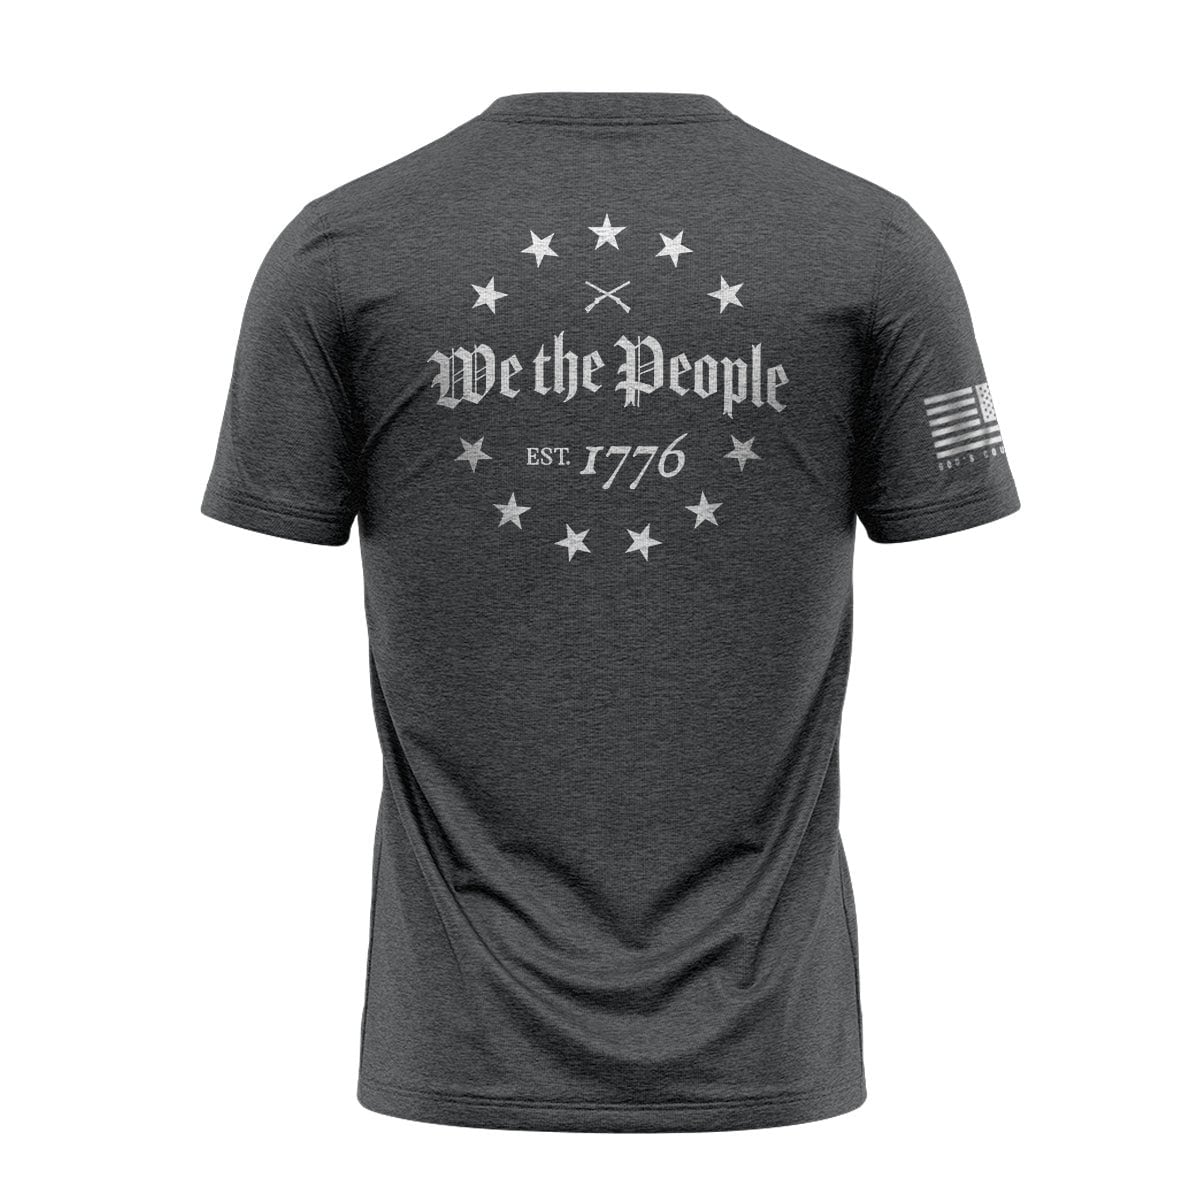 We the People - Etsy